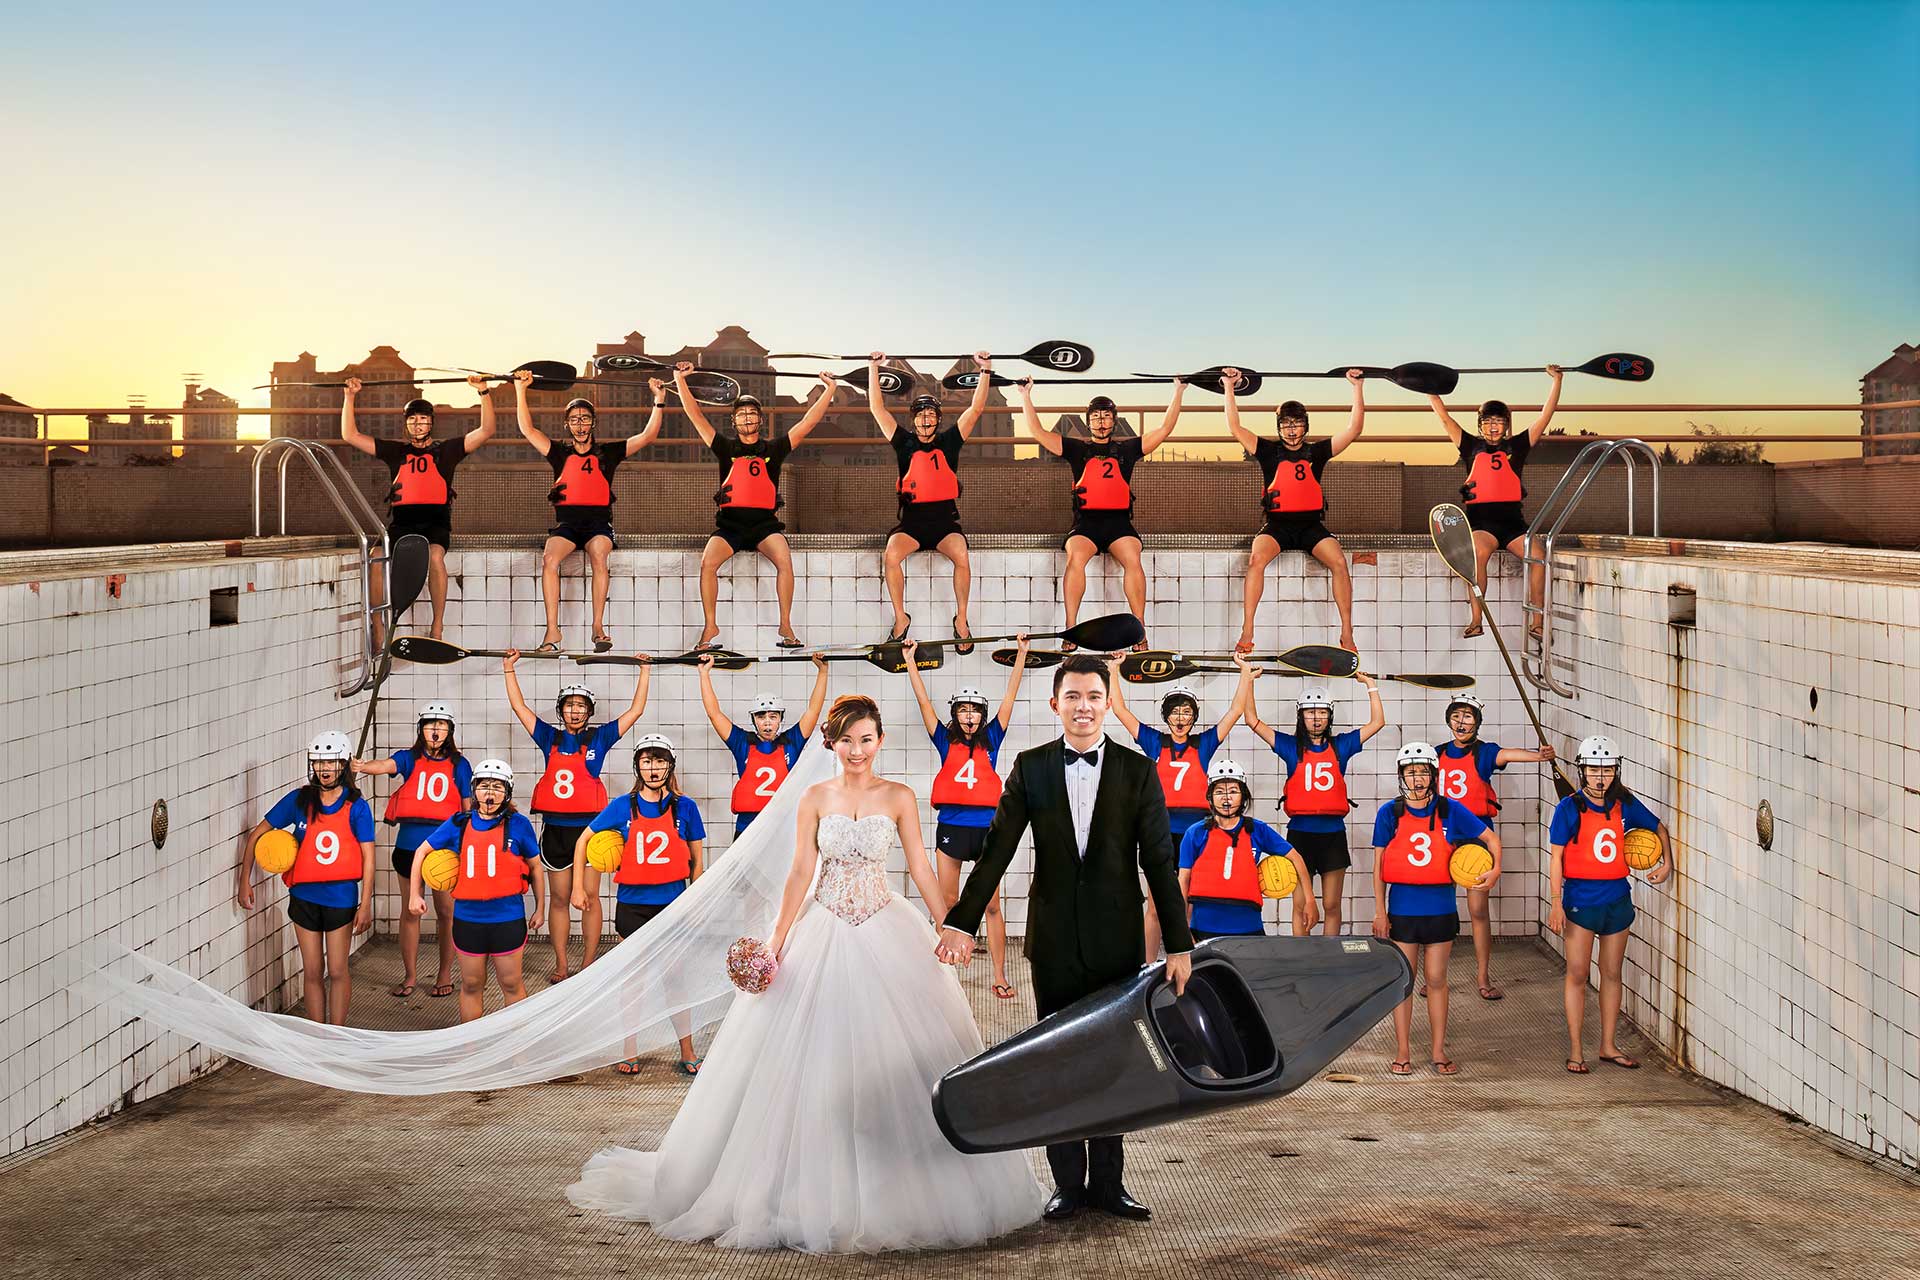 A bride and groom, along with their wedding party, strike a pose in a creative photoshoot that includes a swimmer.